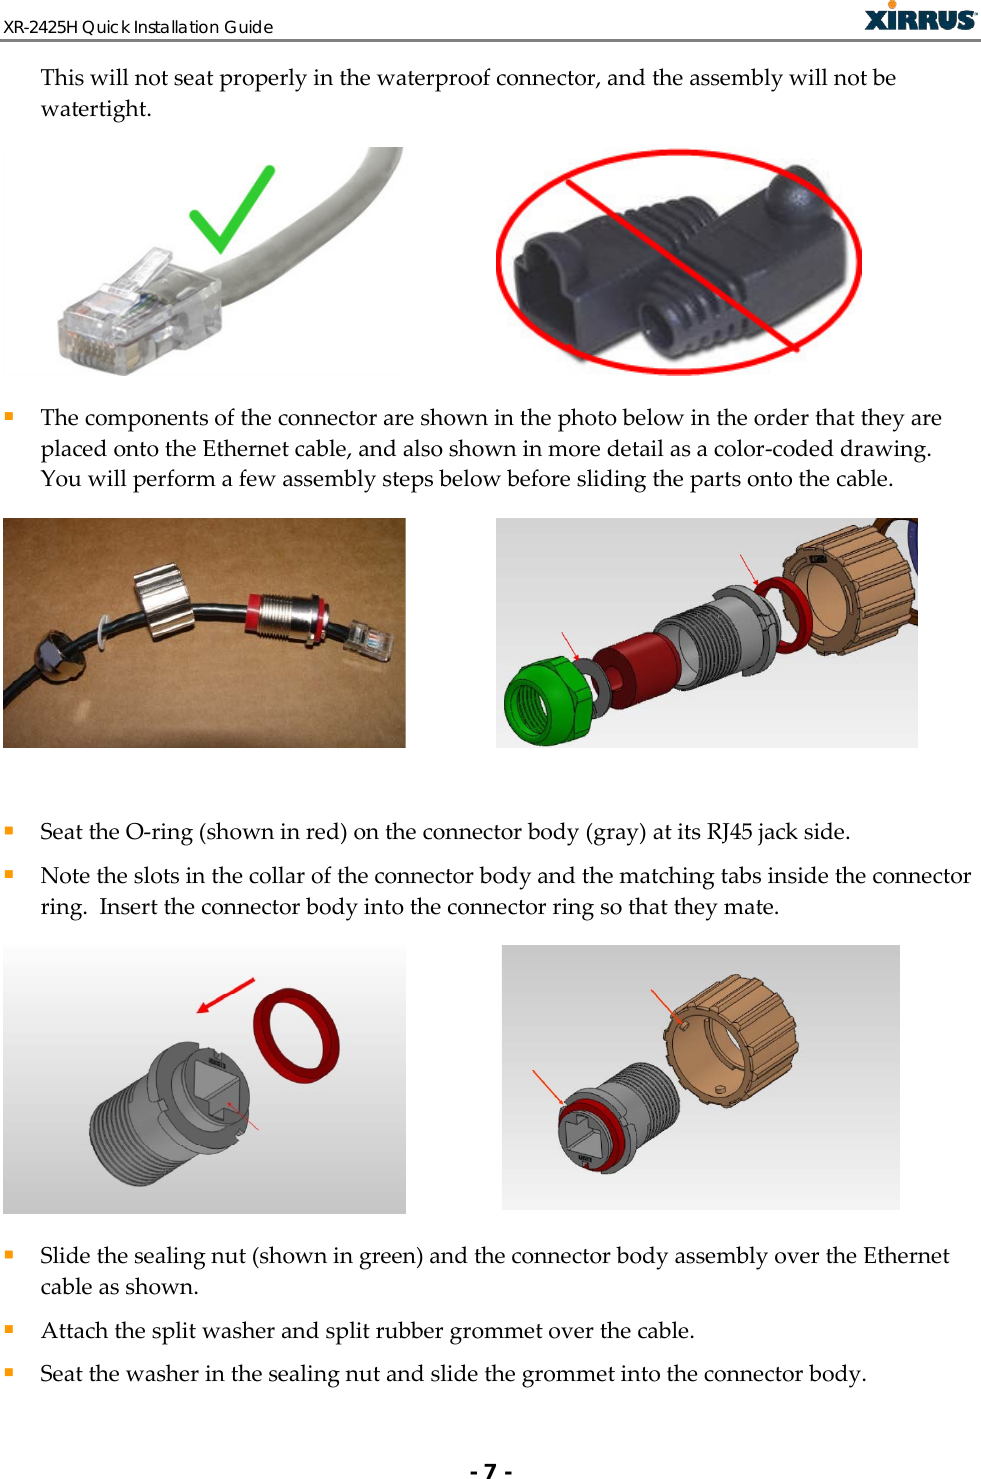 XR-2425H Quick Installation Guide   - 7 - This will not seat properly in the waterproof connector, and the assembly will not be watertight.     The components of the connector are shown in the photo below in the order that they are placed onto the Ethernet cable, and also shown in more detail as a color-coded drawing.  You will perform a few assembly steps below before sliding the parts onto the cable.       Seat the O-ring (shown in red) on the connector body (gray) at its RJ45 jack side.  Note the slots in the collar of the connector body and the matching tabs inside the connector ring.  Insert the connector body into the connector ring so that they mate.     Slide the sealing nut (shown in green) and the connector body assembly over the Ethernet cable as shown.   Attach the split washer and split rubber grommet over the cable.   Seat the washer in the sealing nut and slide the grommet into the connector body.  